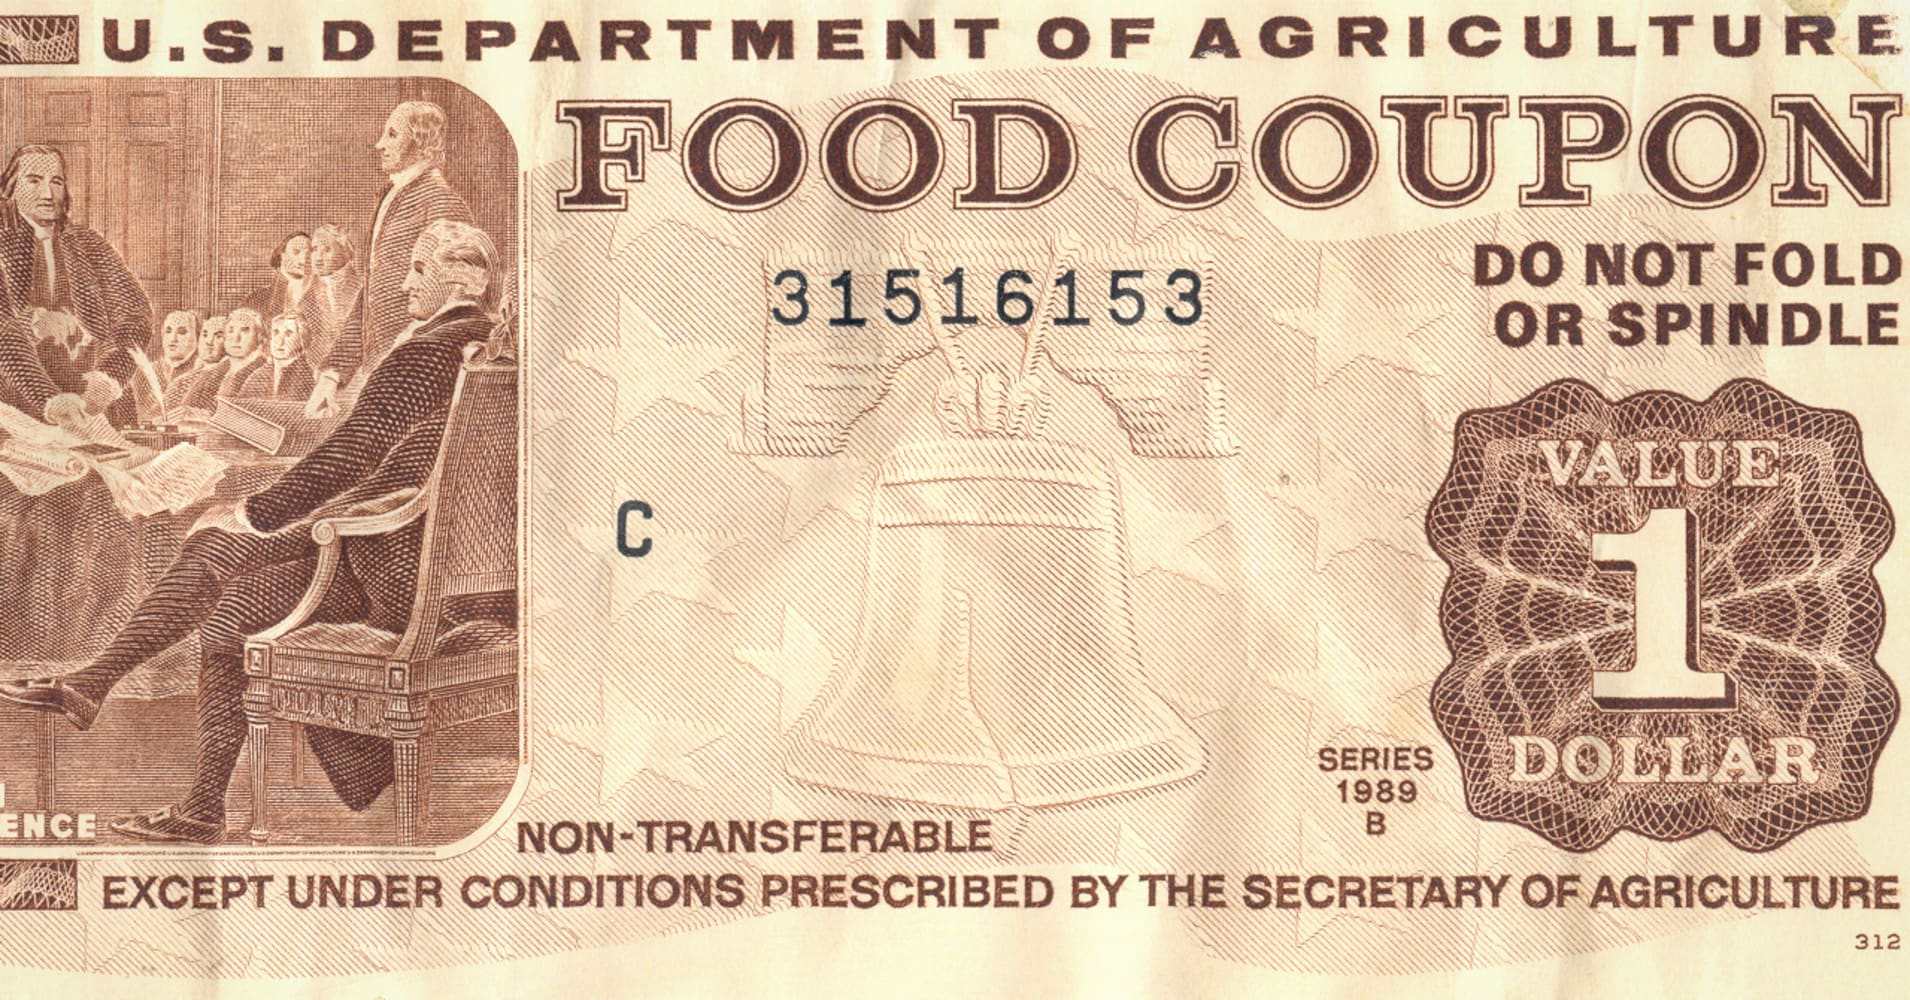 Hunger Amidst Plenty: Congress, the Civil Rights Movement, and the Transformation of the Food Stamp Program